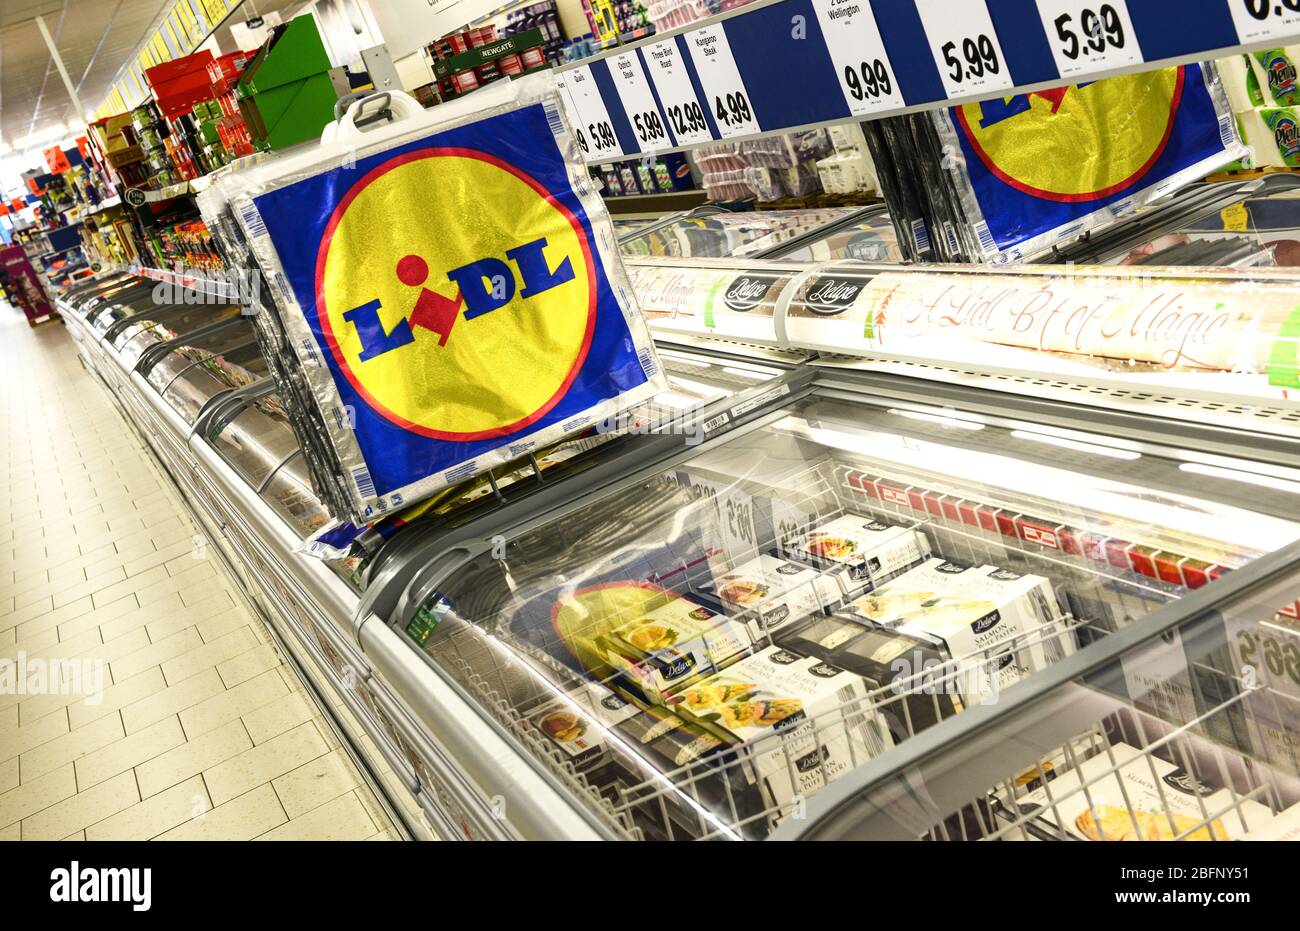 Lidl bag in aisle Stock Photo